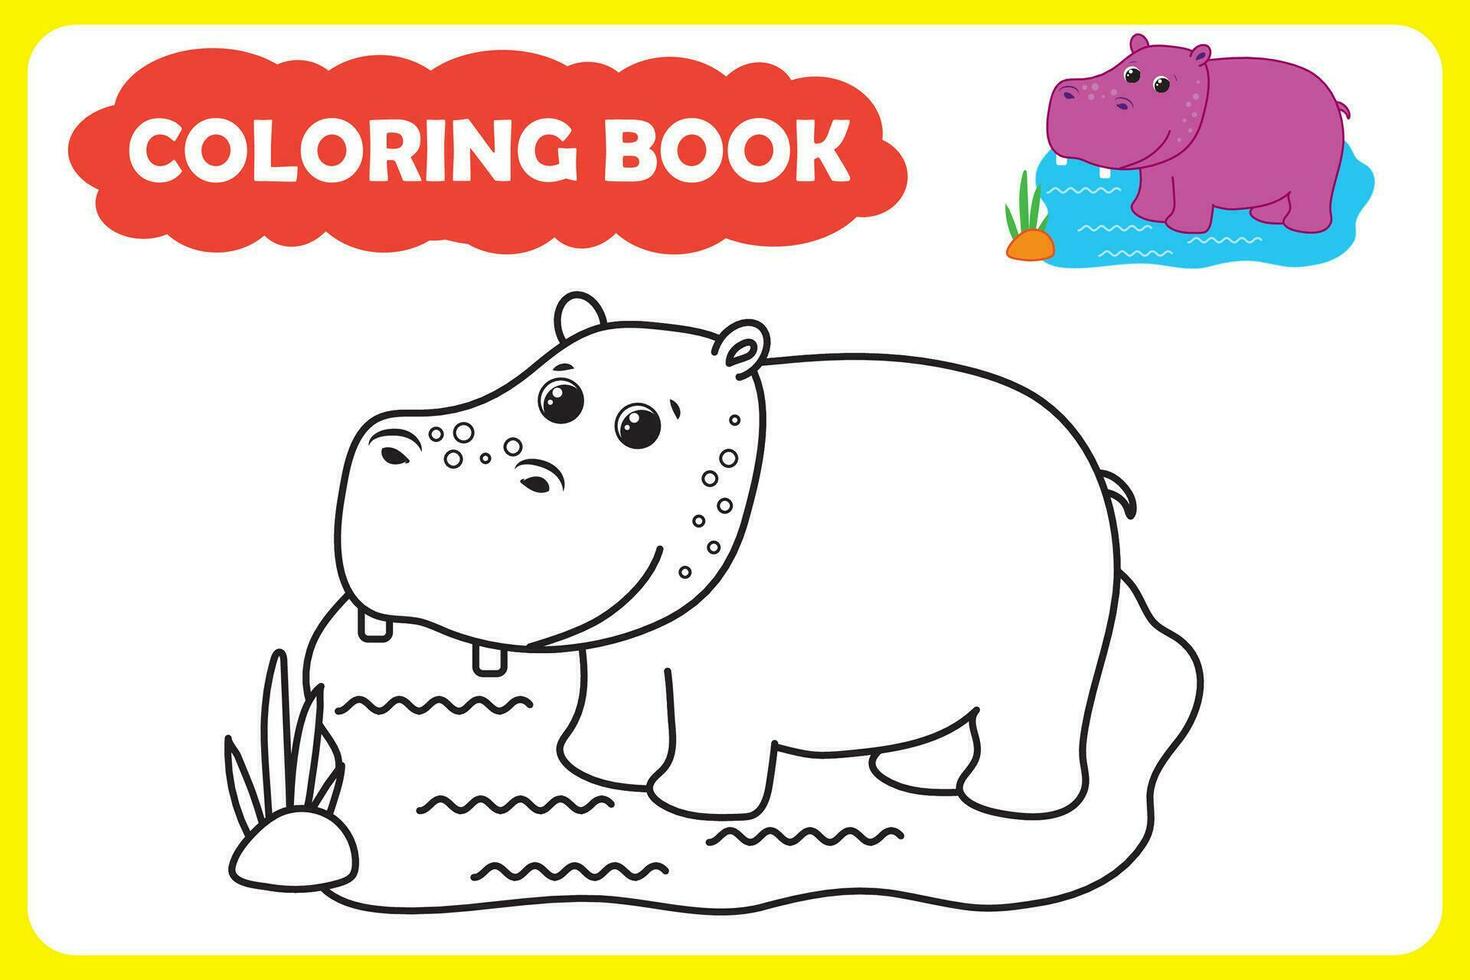 coloring book for children. vector illustration of African animal